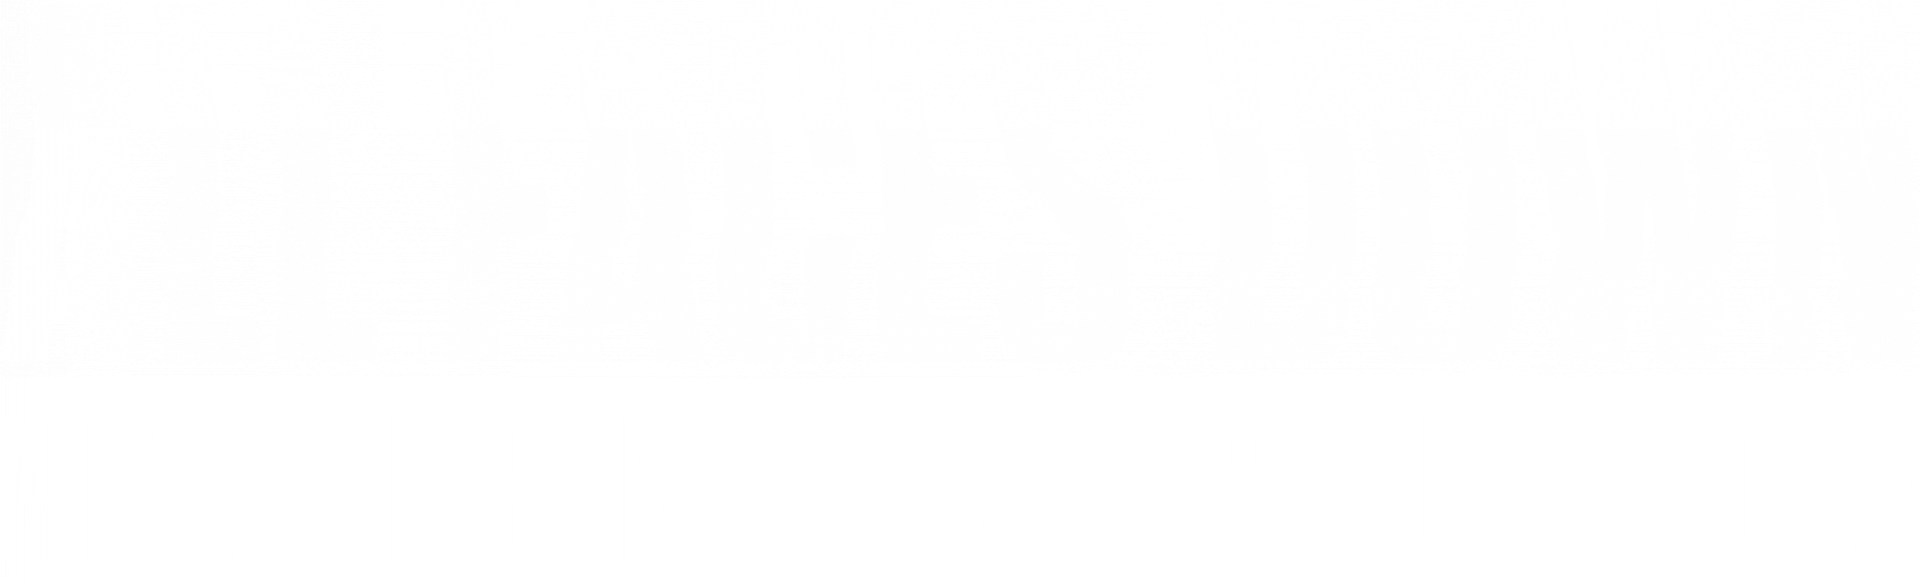 All Faces Down - New album AWOL out now!